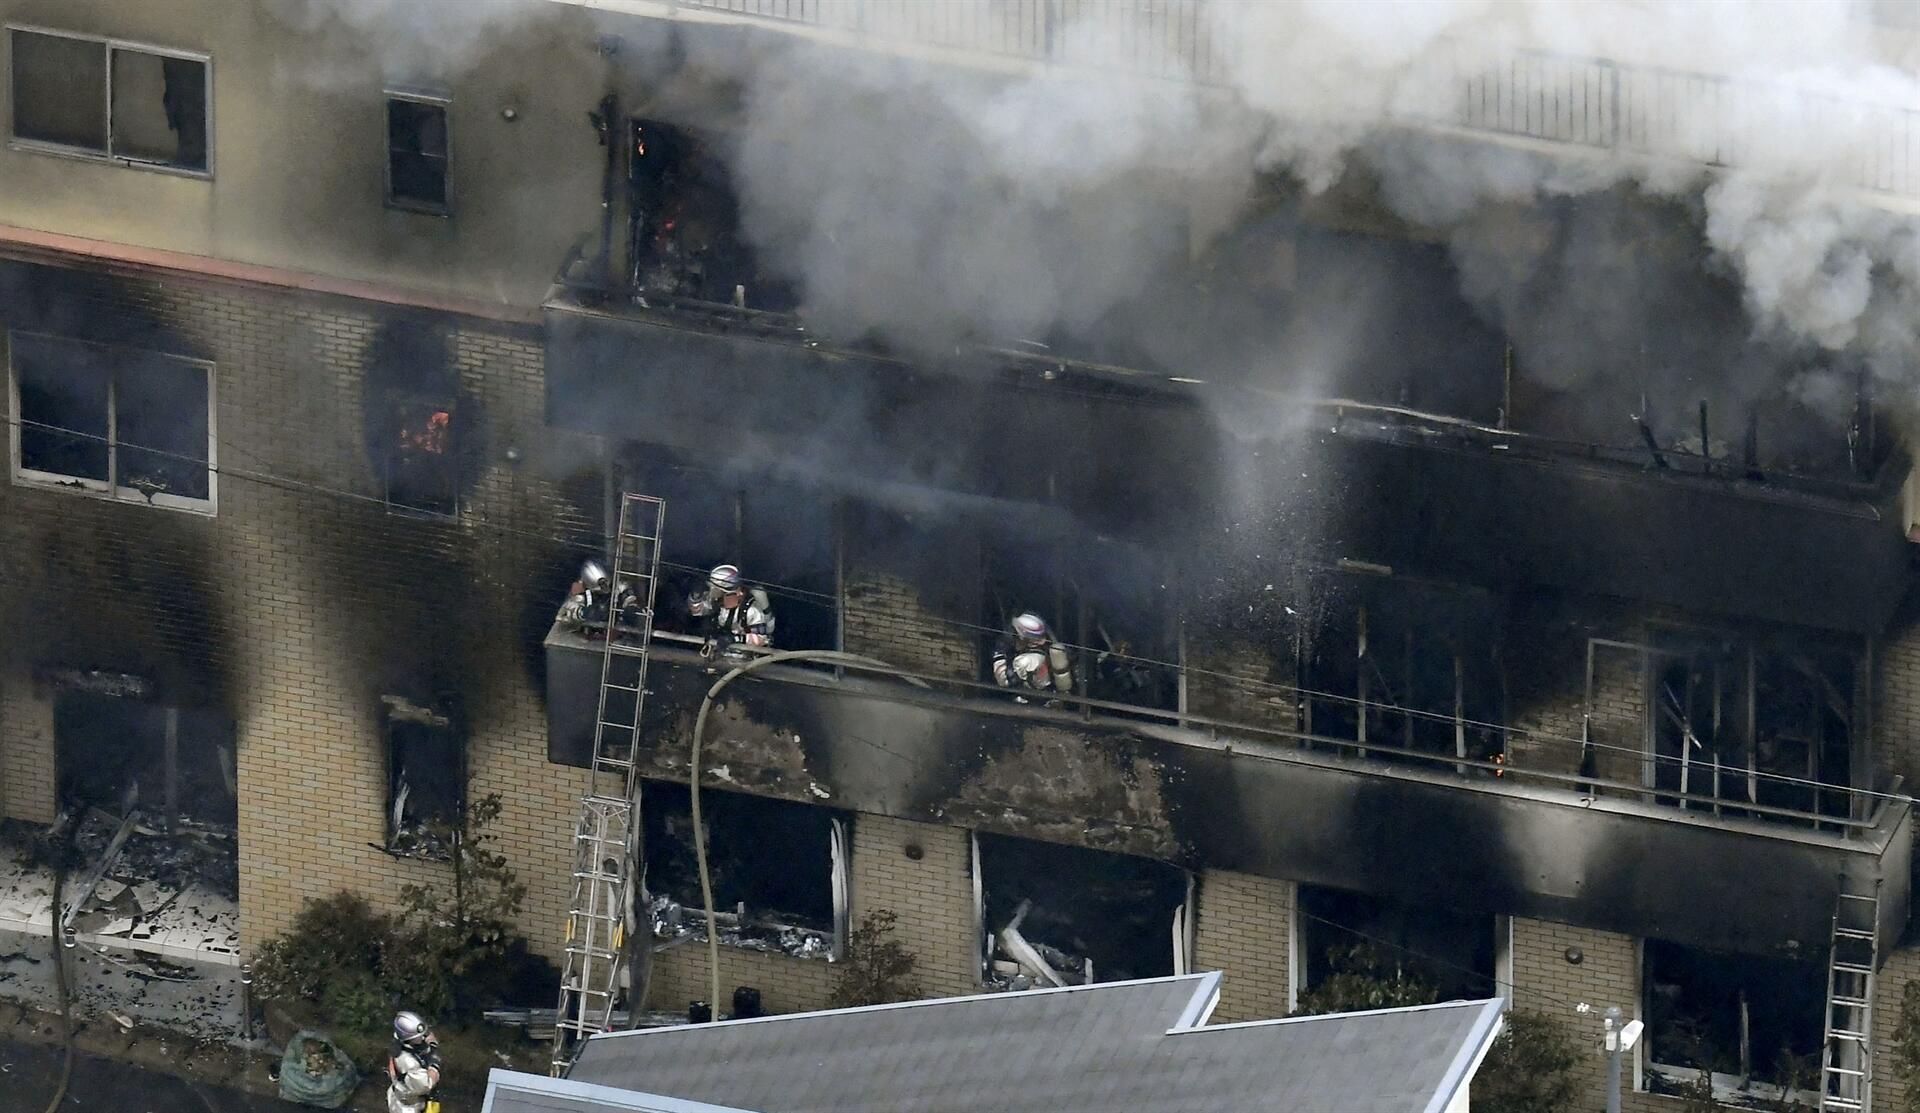 Suspected arson in Japan anime studio leaves up to 23 dead - World News